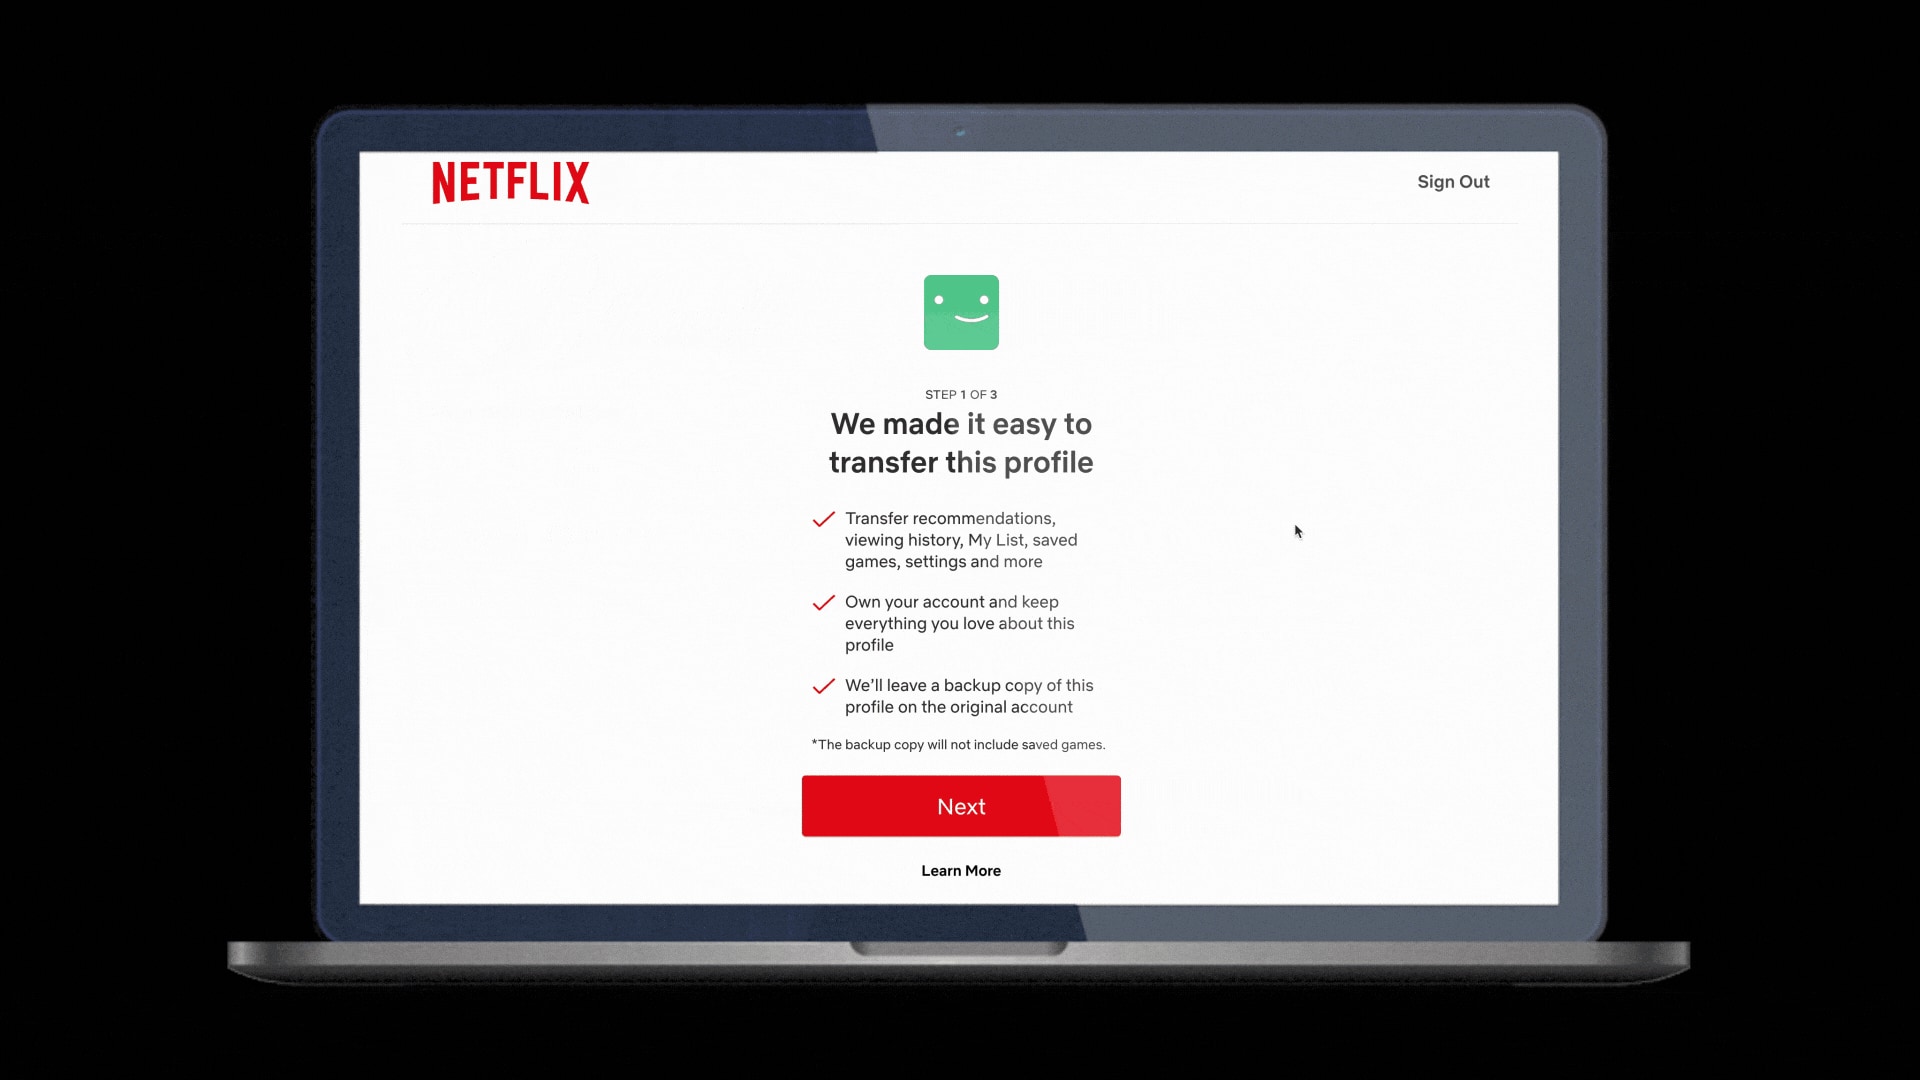 Splash screen for the Transfer Profile feature on Netflix laying out the benefits of transferring profile data to a new account 